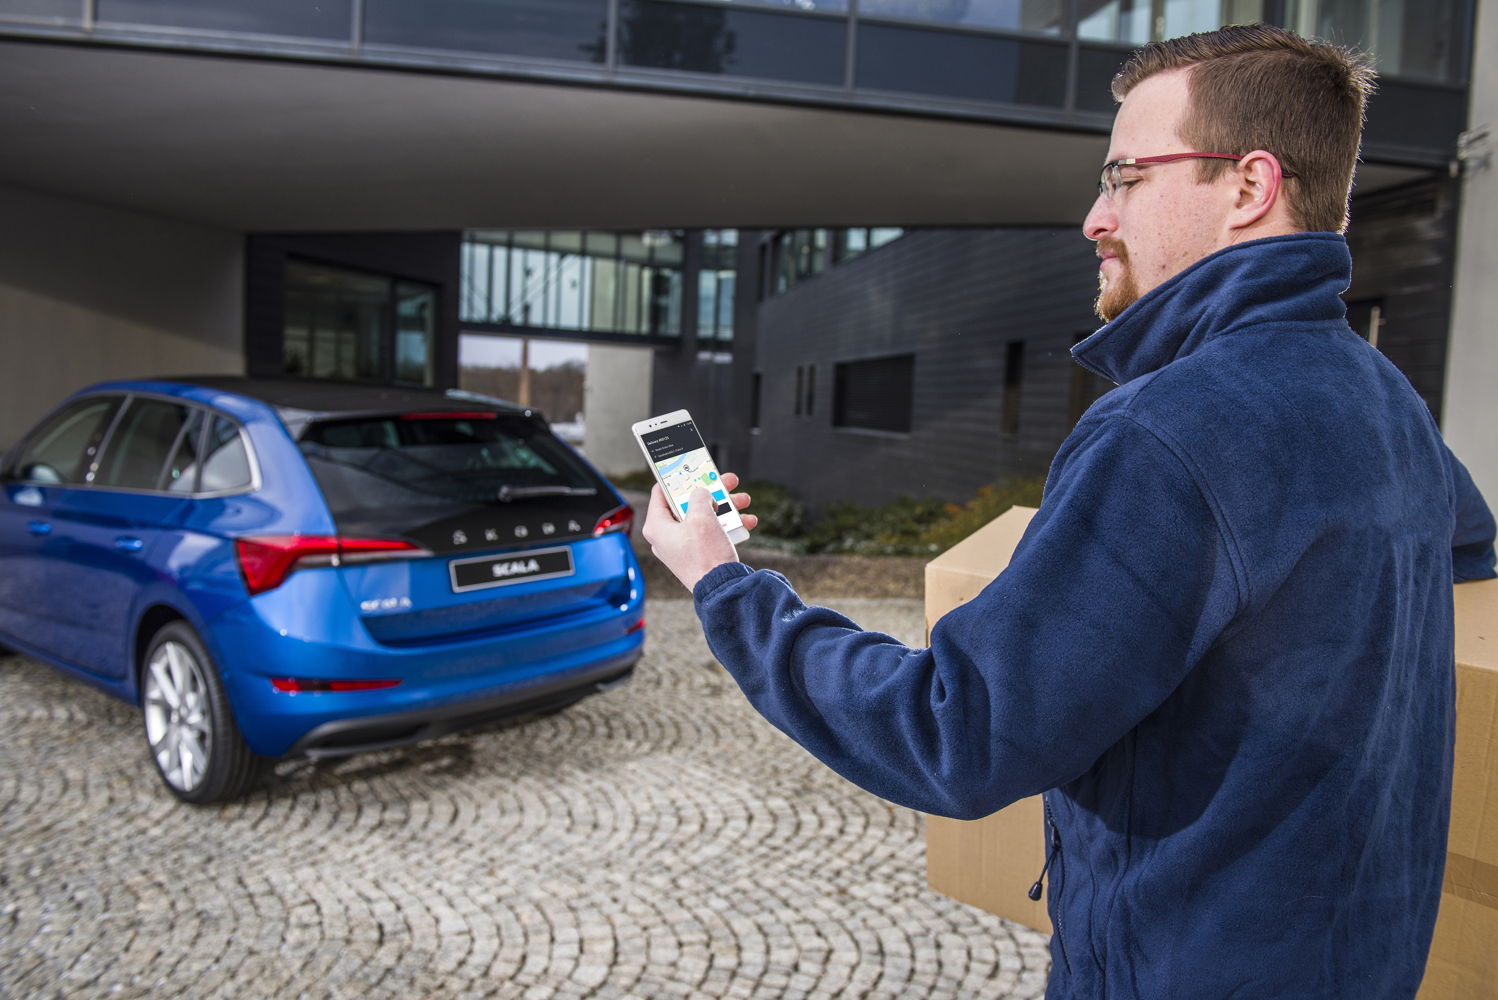 Together with Czech online retailers Alza.cz and Rohlik.cz,
ŠKODA AUTO DigiLab is testing an innovative, convenient
and safe method of parcel delivery as part of a pilot project.